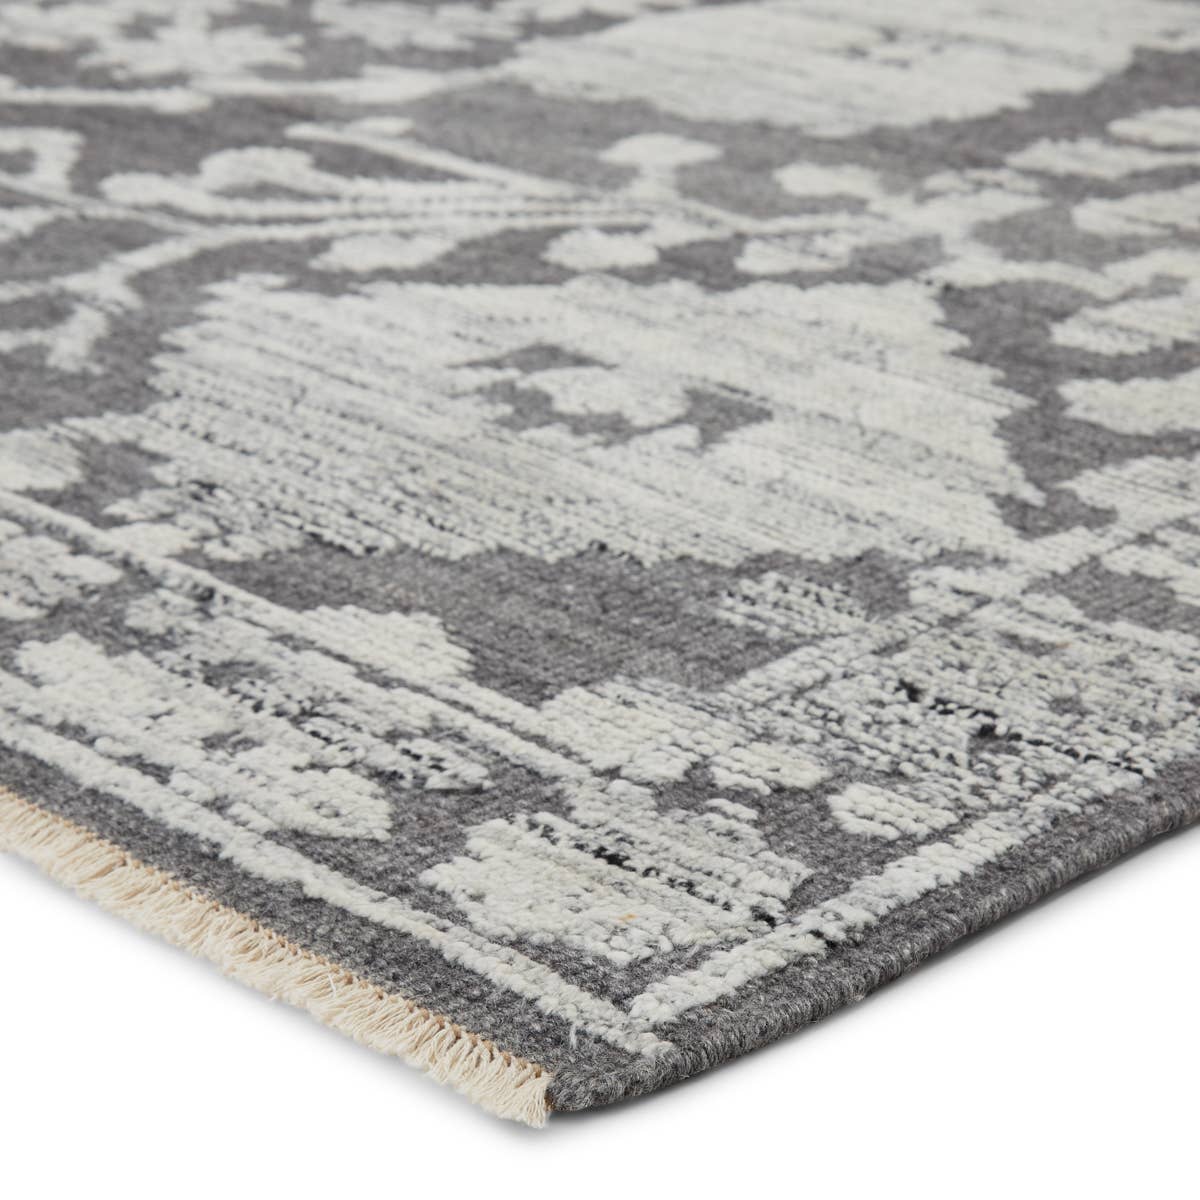 The Sonnette Riona Area Rug by Jaipur Living, or SNN01, boasts a high-contrast gray and silver palette that creates dimension among the florette medallion design. This hand-knotted wool rug features fringe trimmed details for a touch of global charm. A gorgeous choice for your bedroom or other medium traffic areas. 